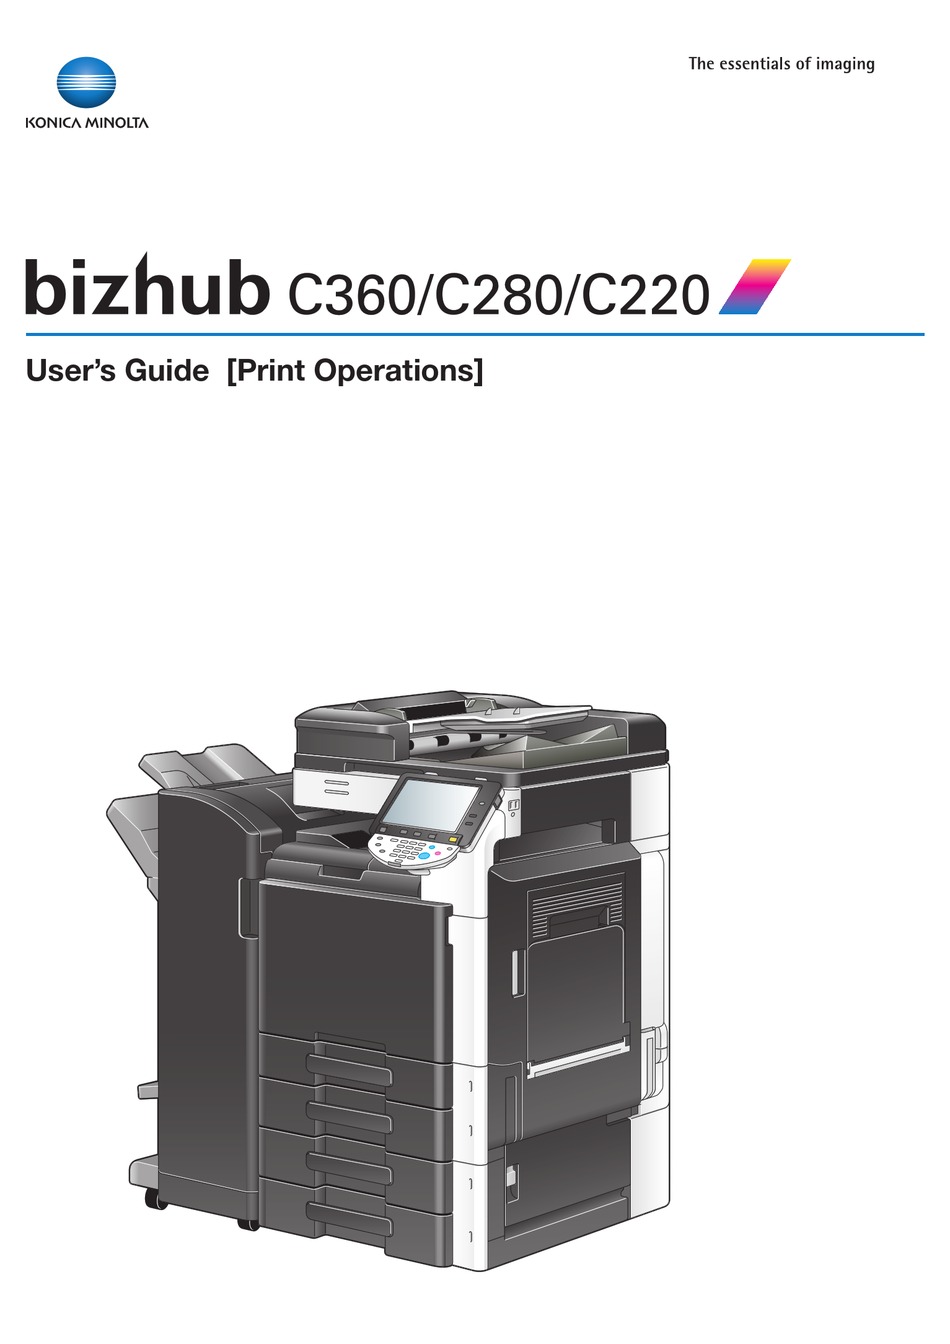 Konica Minolta Bizhub C220 Driver Windows 10 / How To Get Your Pc To Print To Your Konica ...